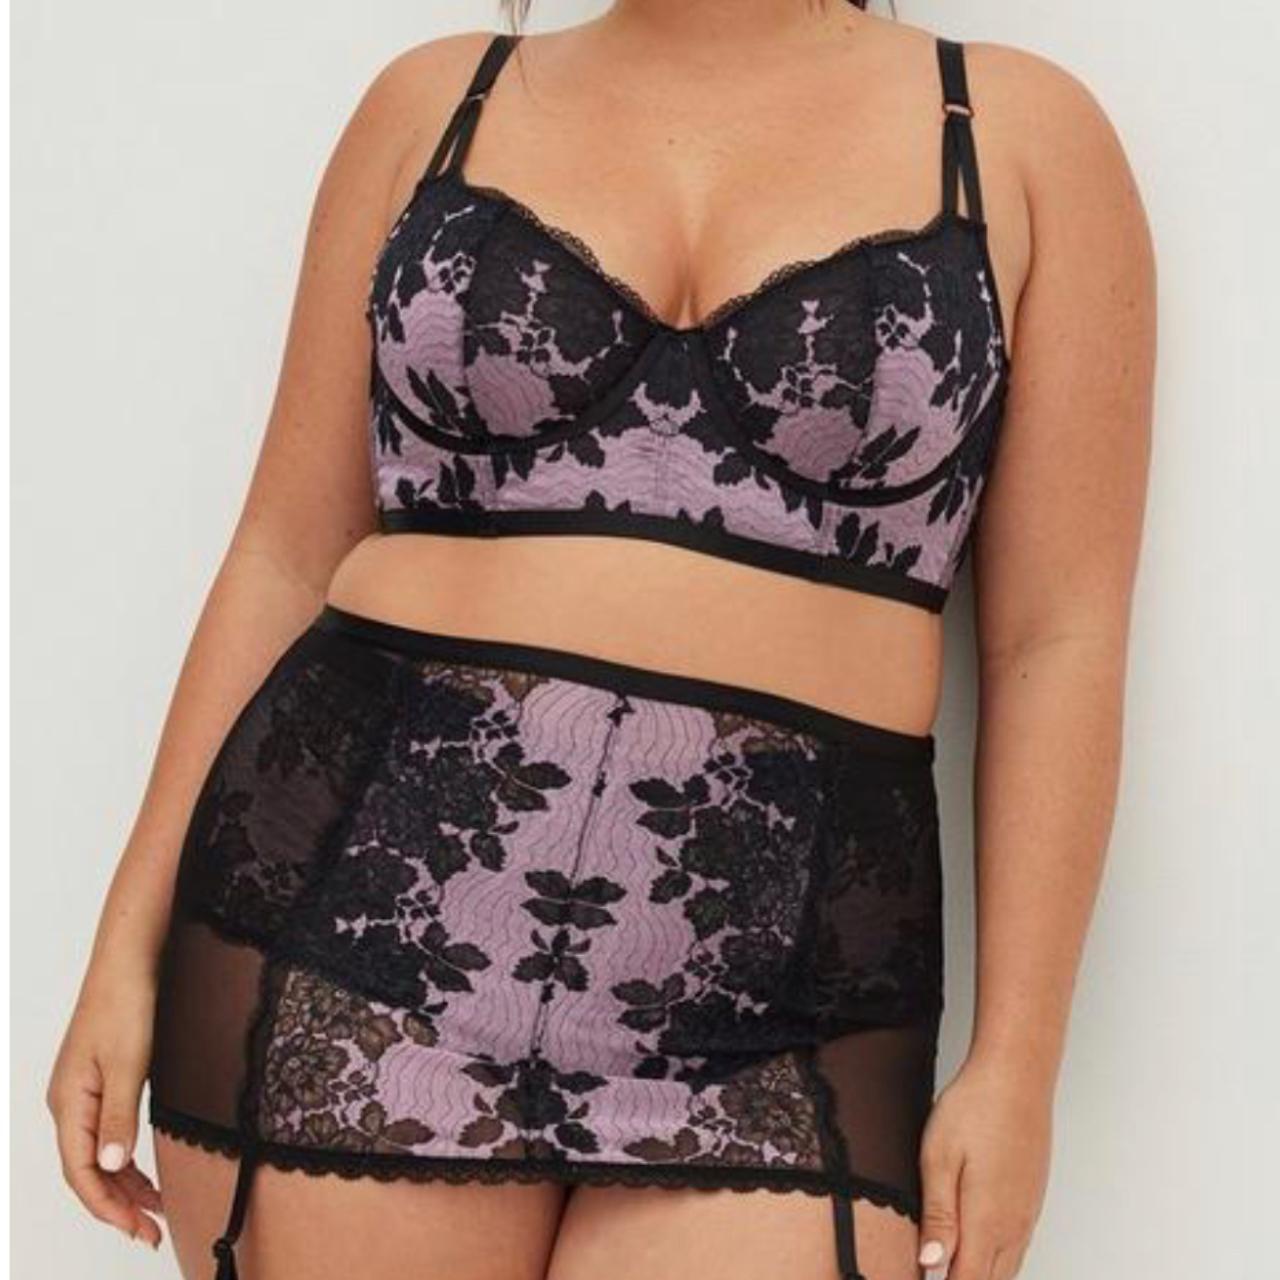 Size 3 Torrid lace bralette. Fits from 44-46 band